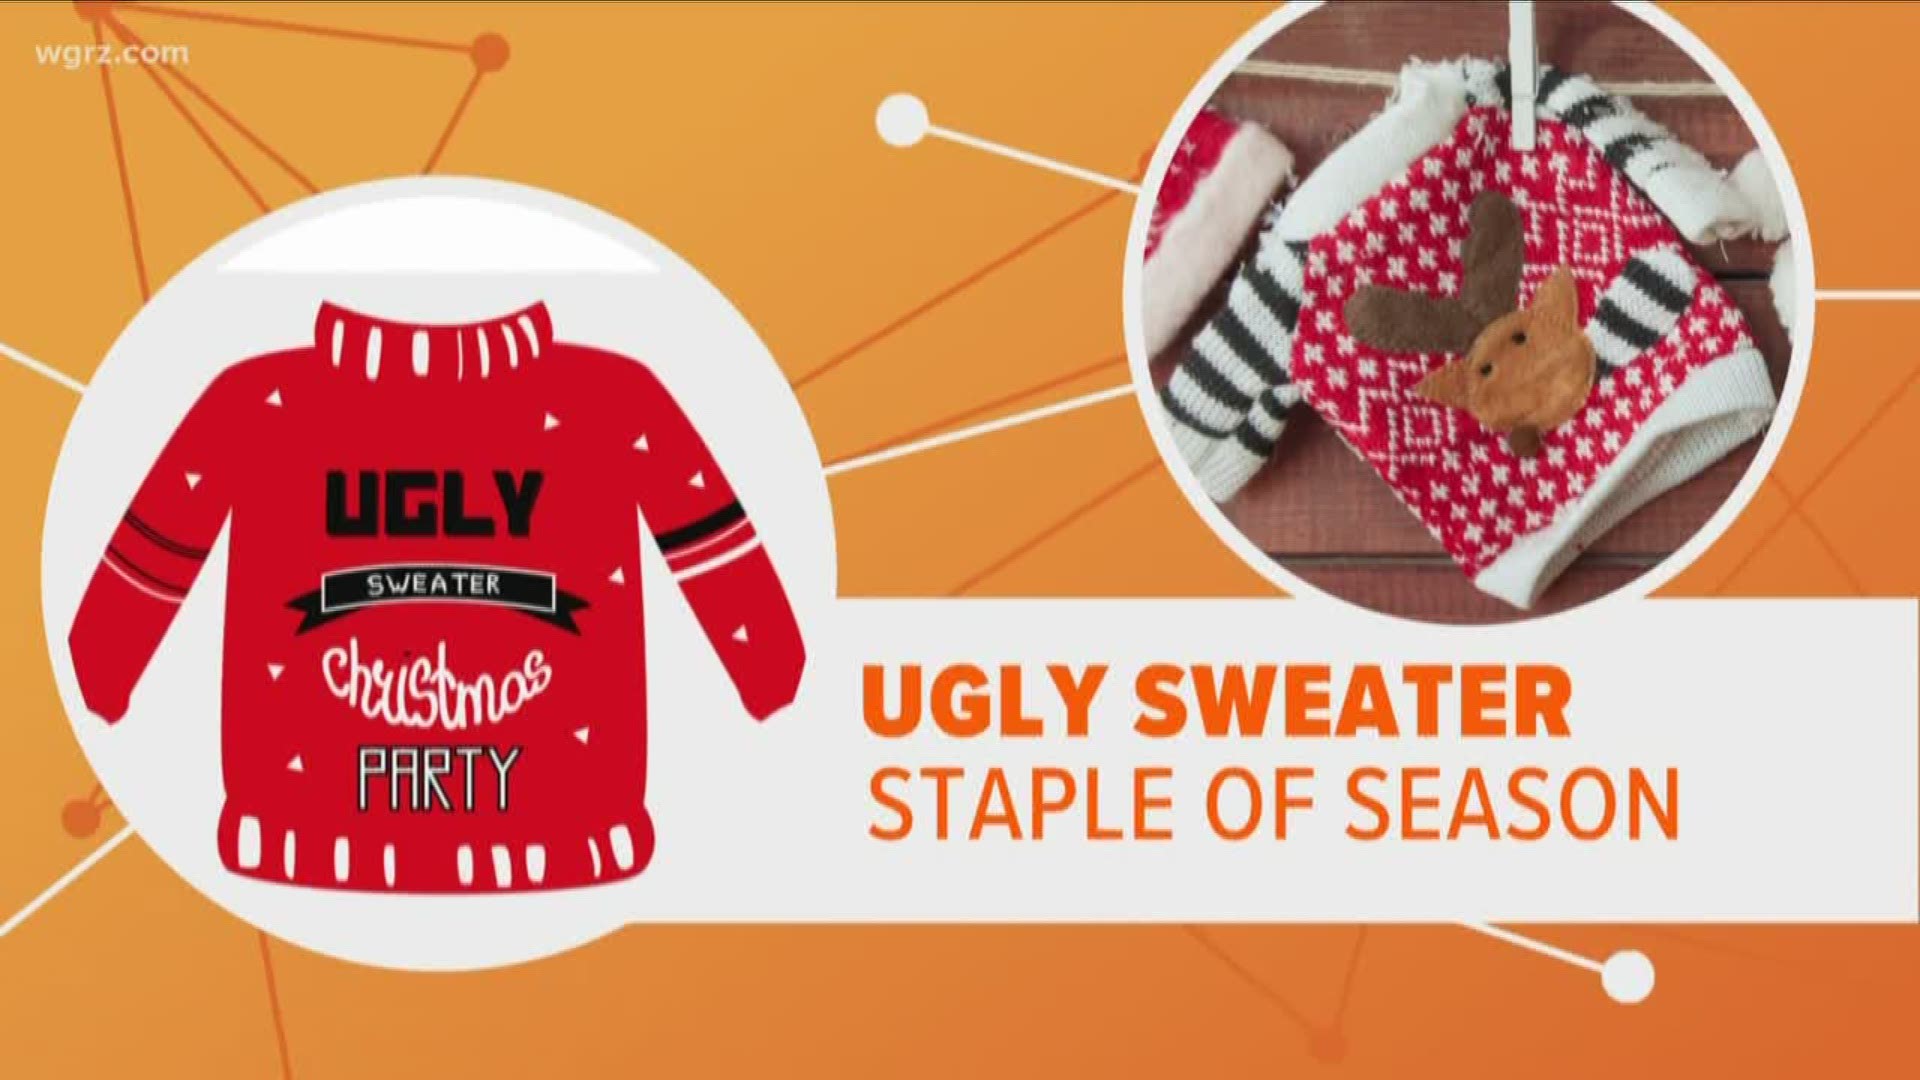 Today is national ugly sweater day